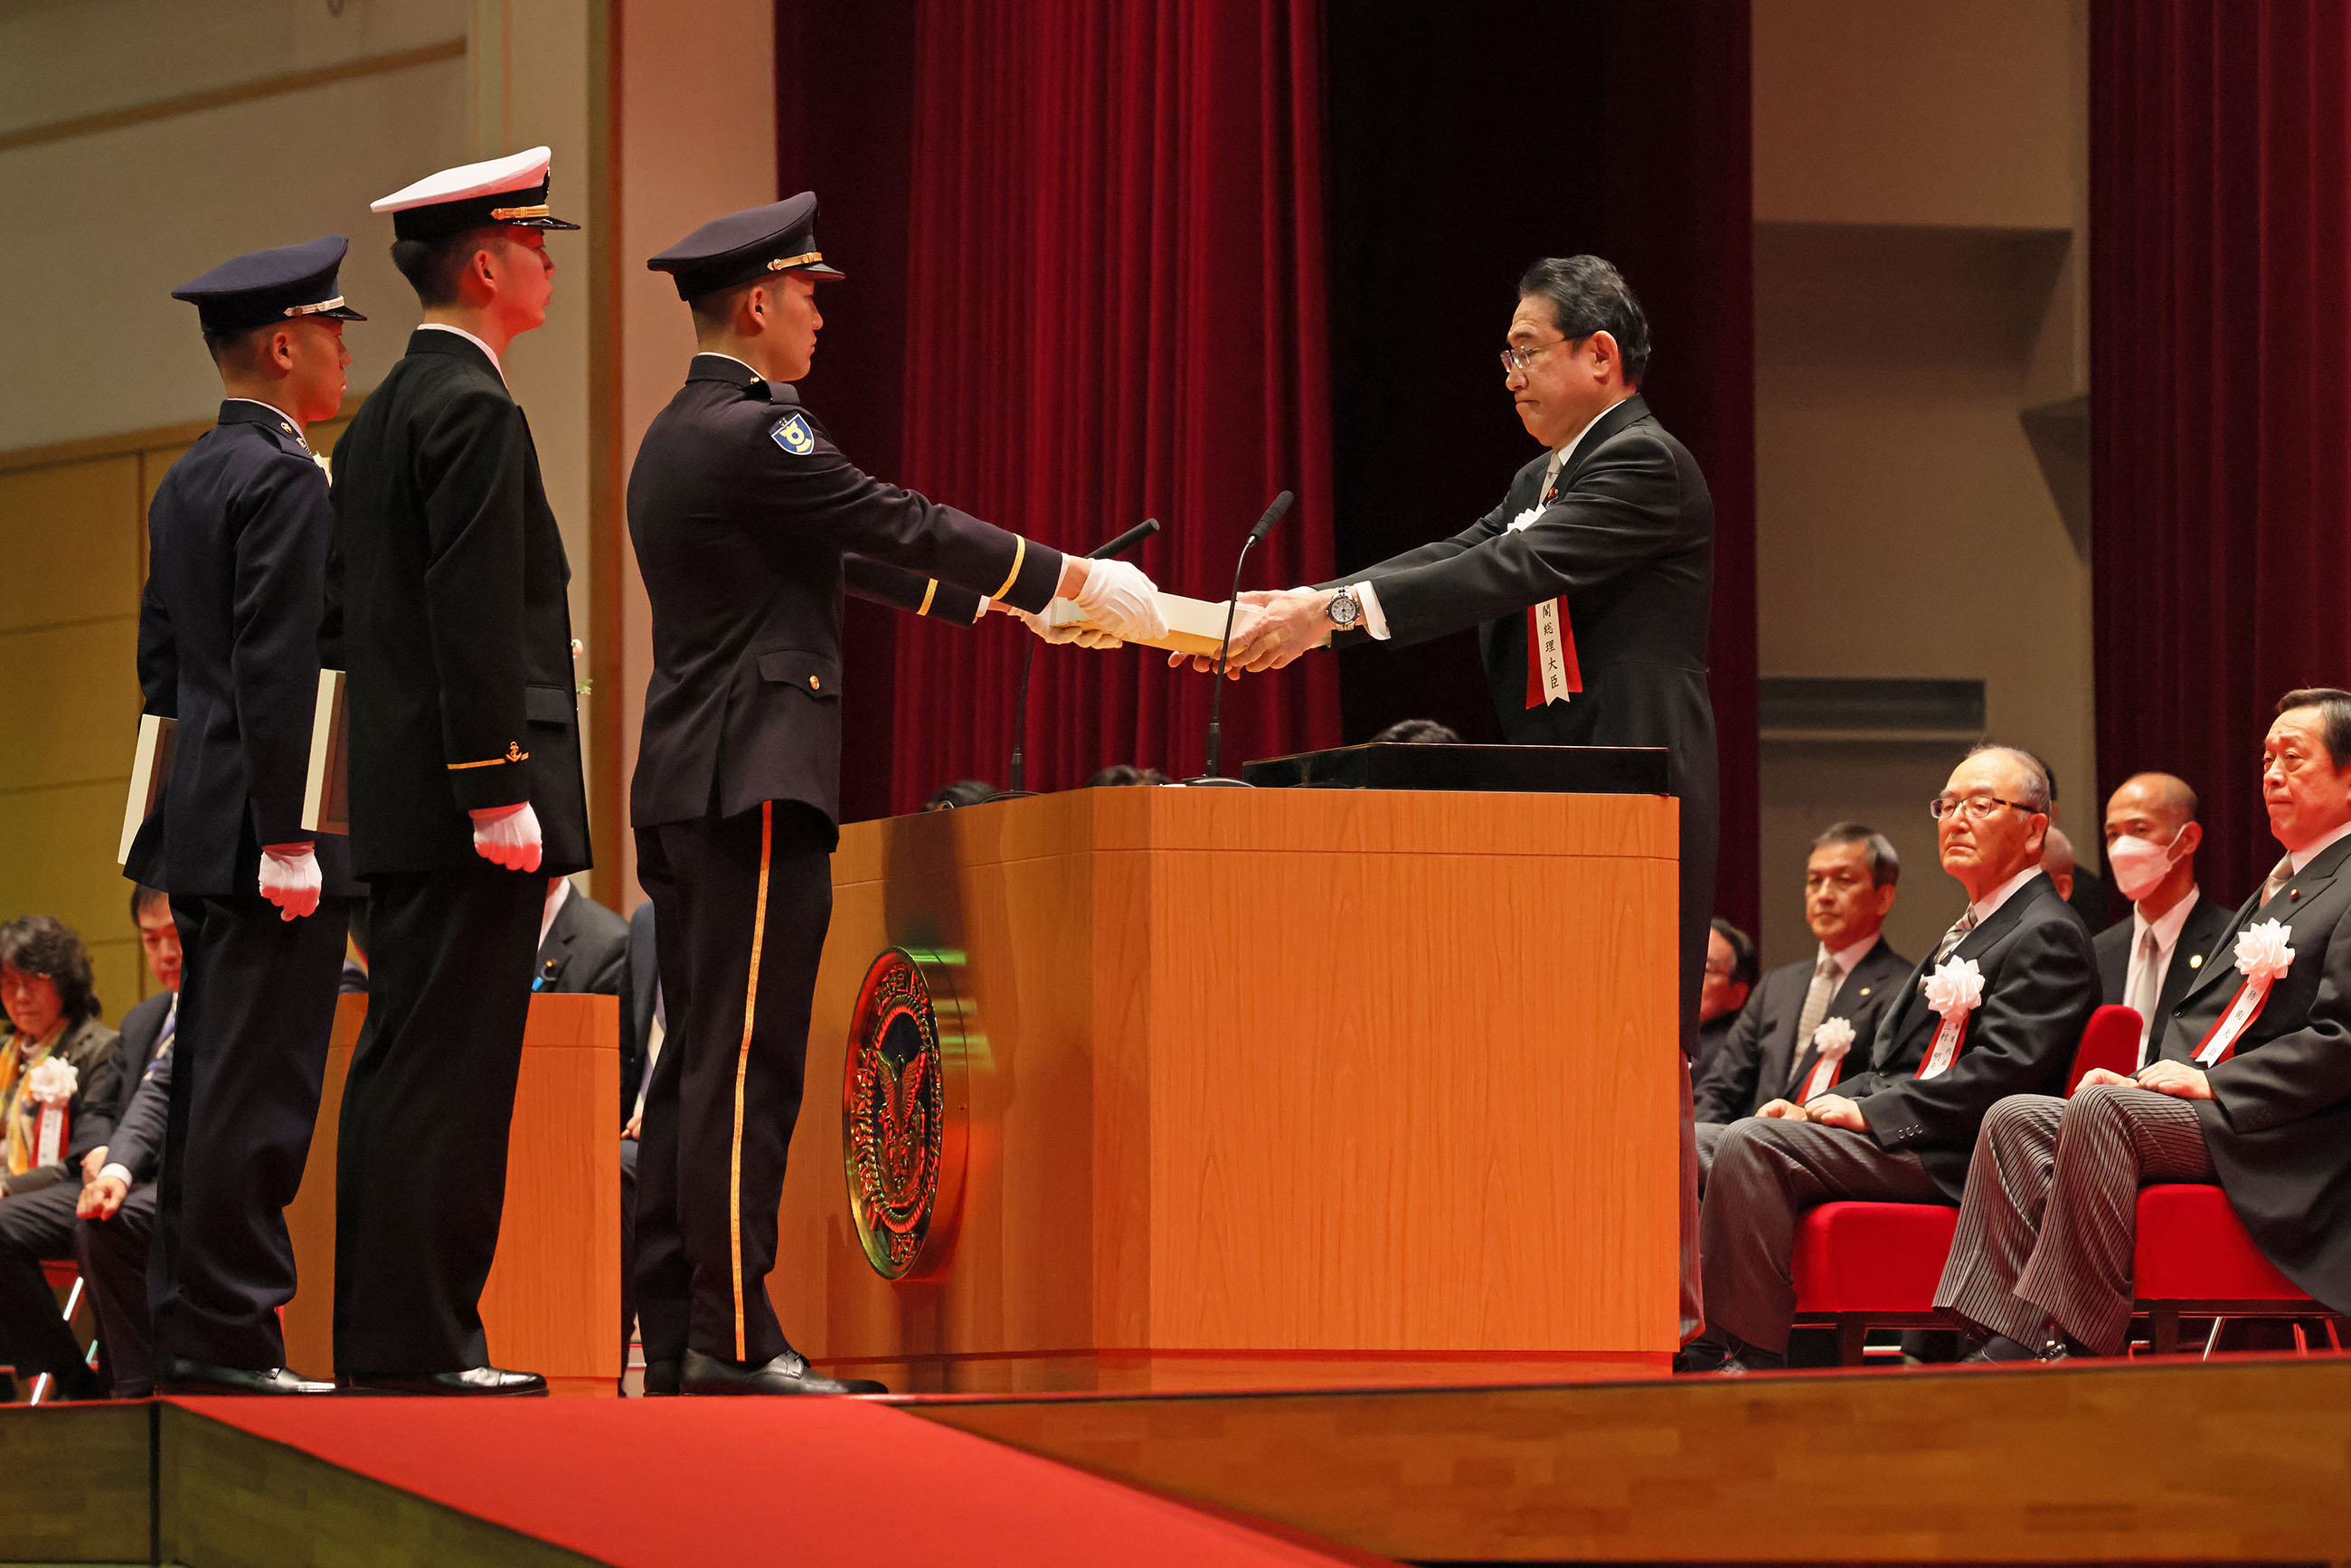 Prime Minister Kishida attending the assignment and oath of service ceremony (2)